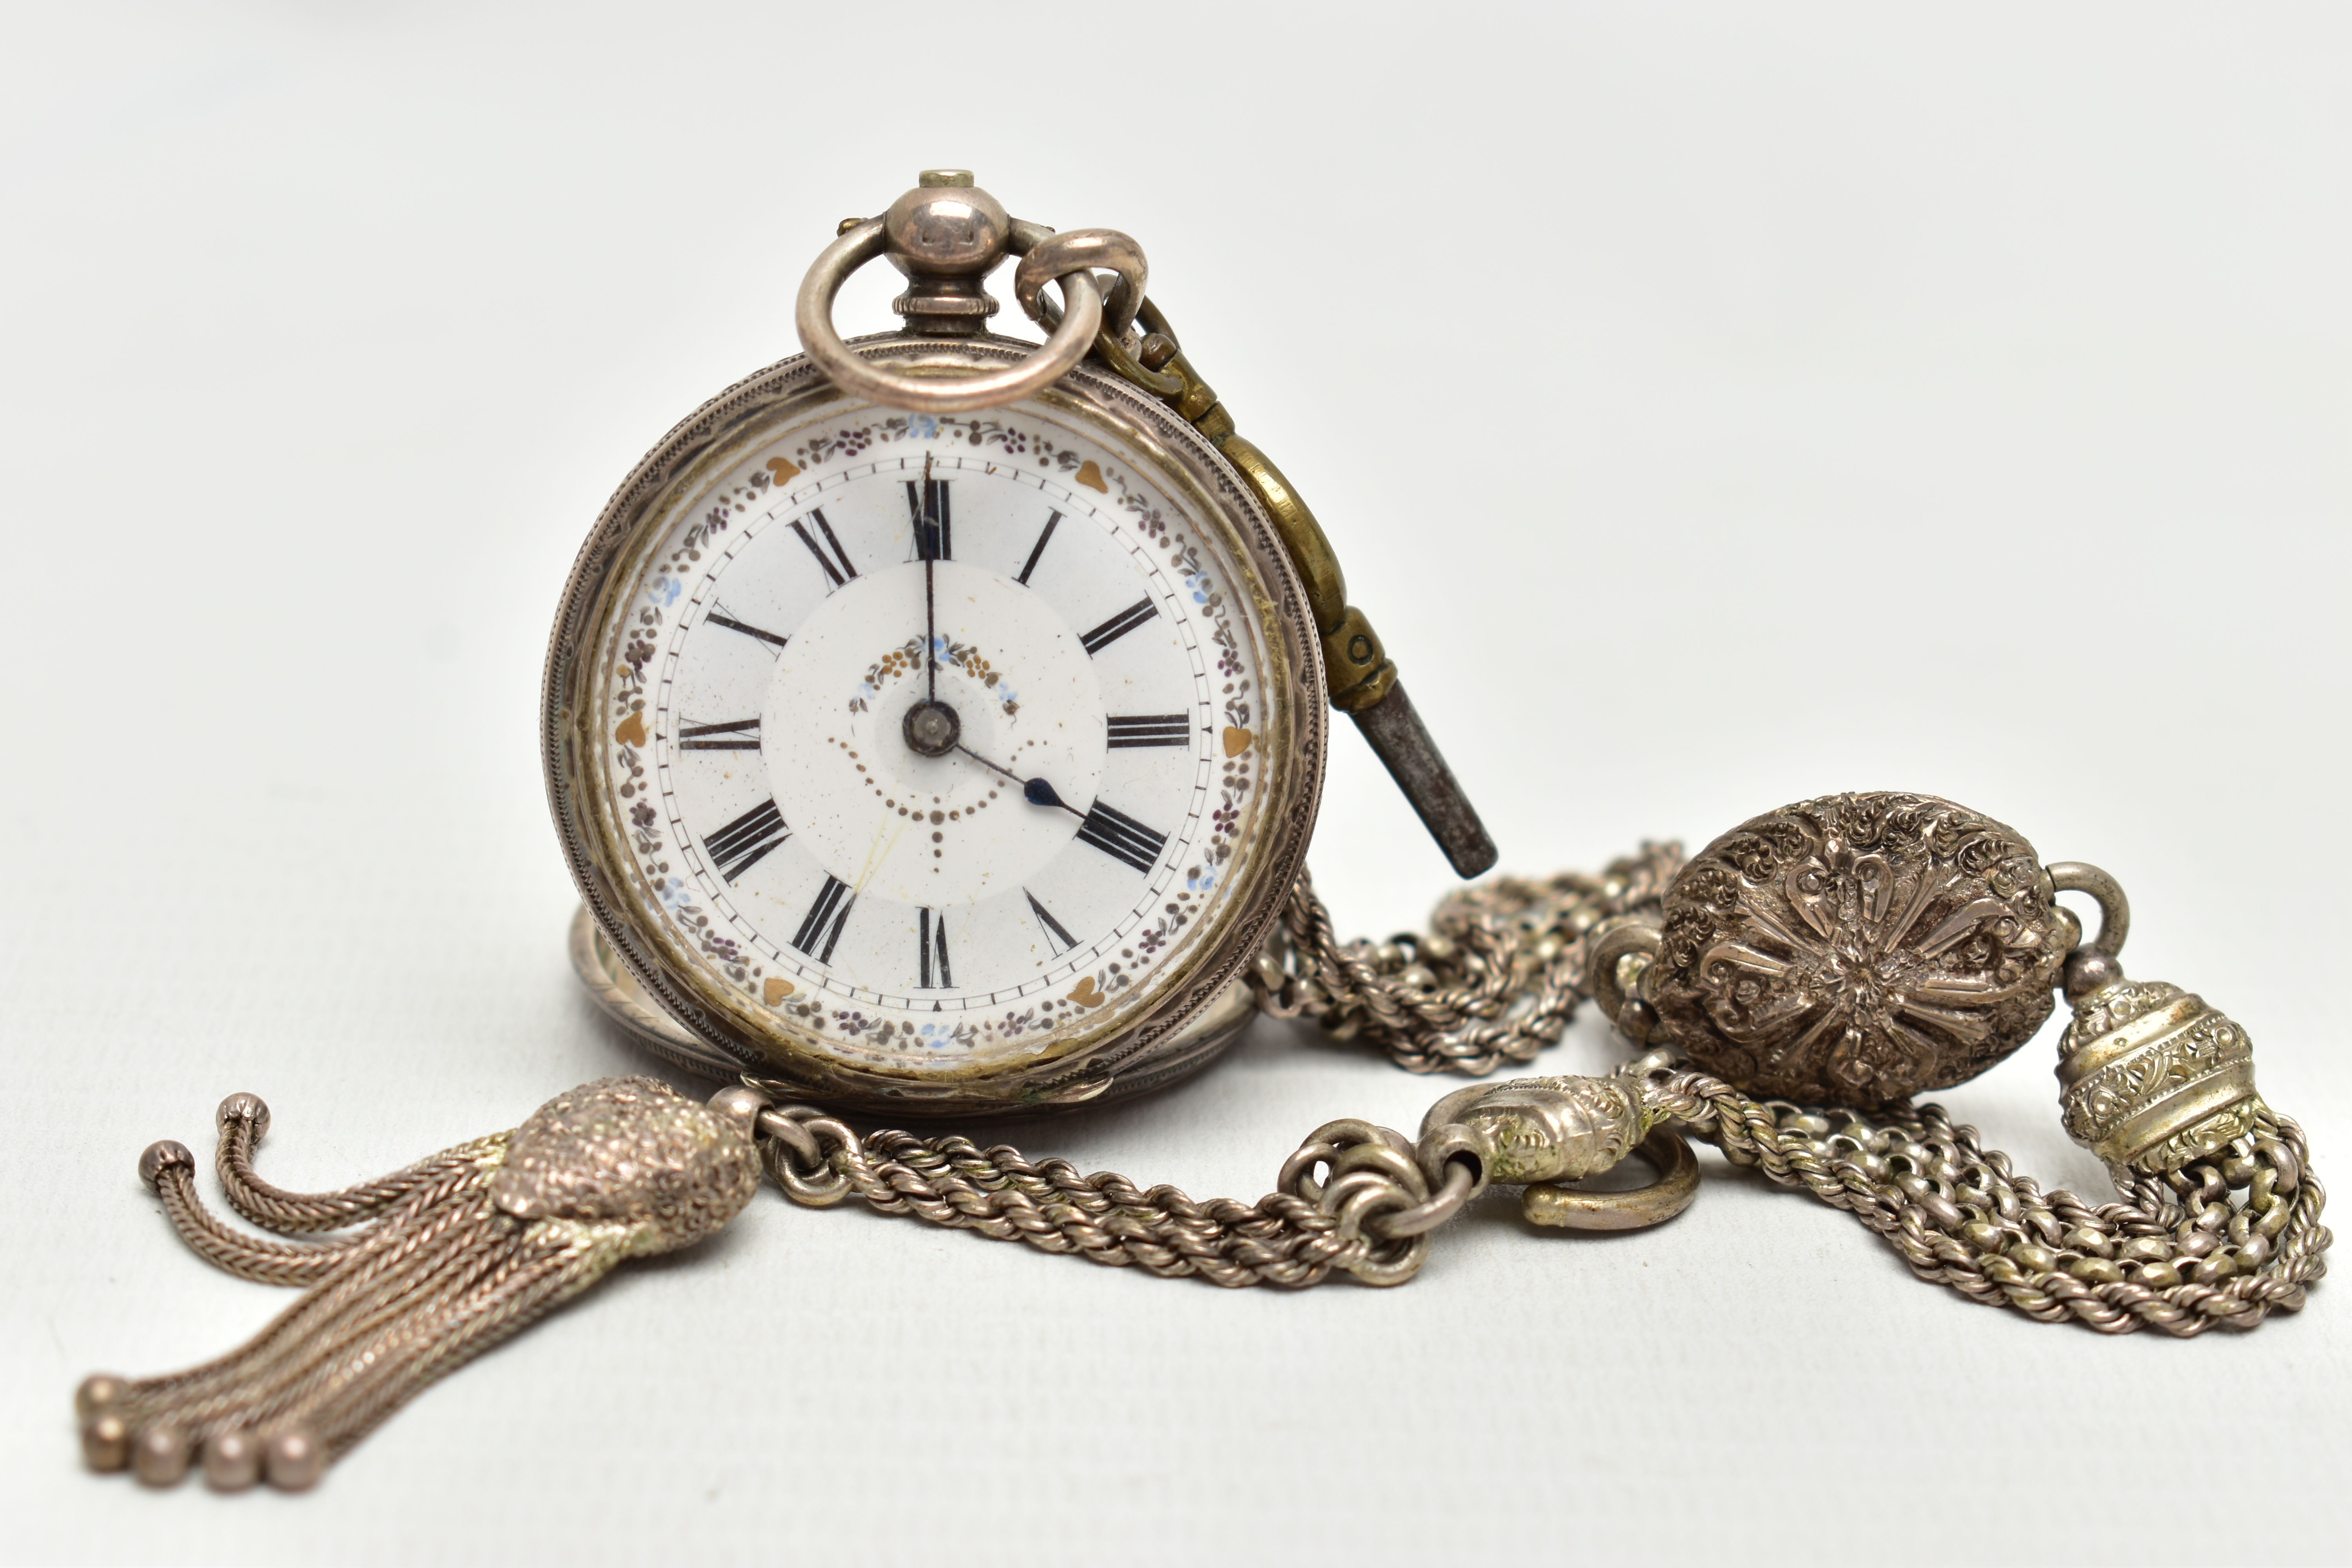 A LADY'S SILVER OPEN FACE POCKET WATCH WITH ALBERTINA, key wound pocket watch, round white dial with